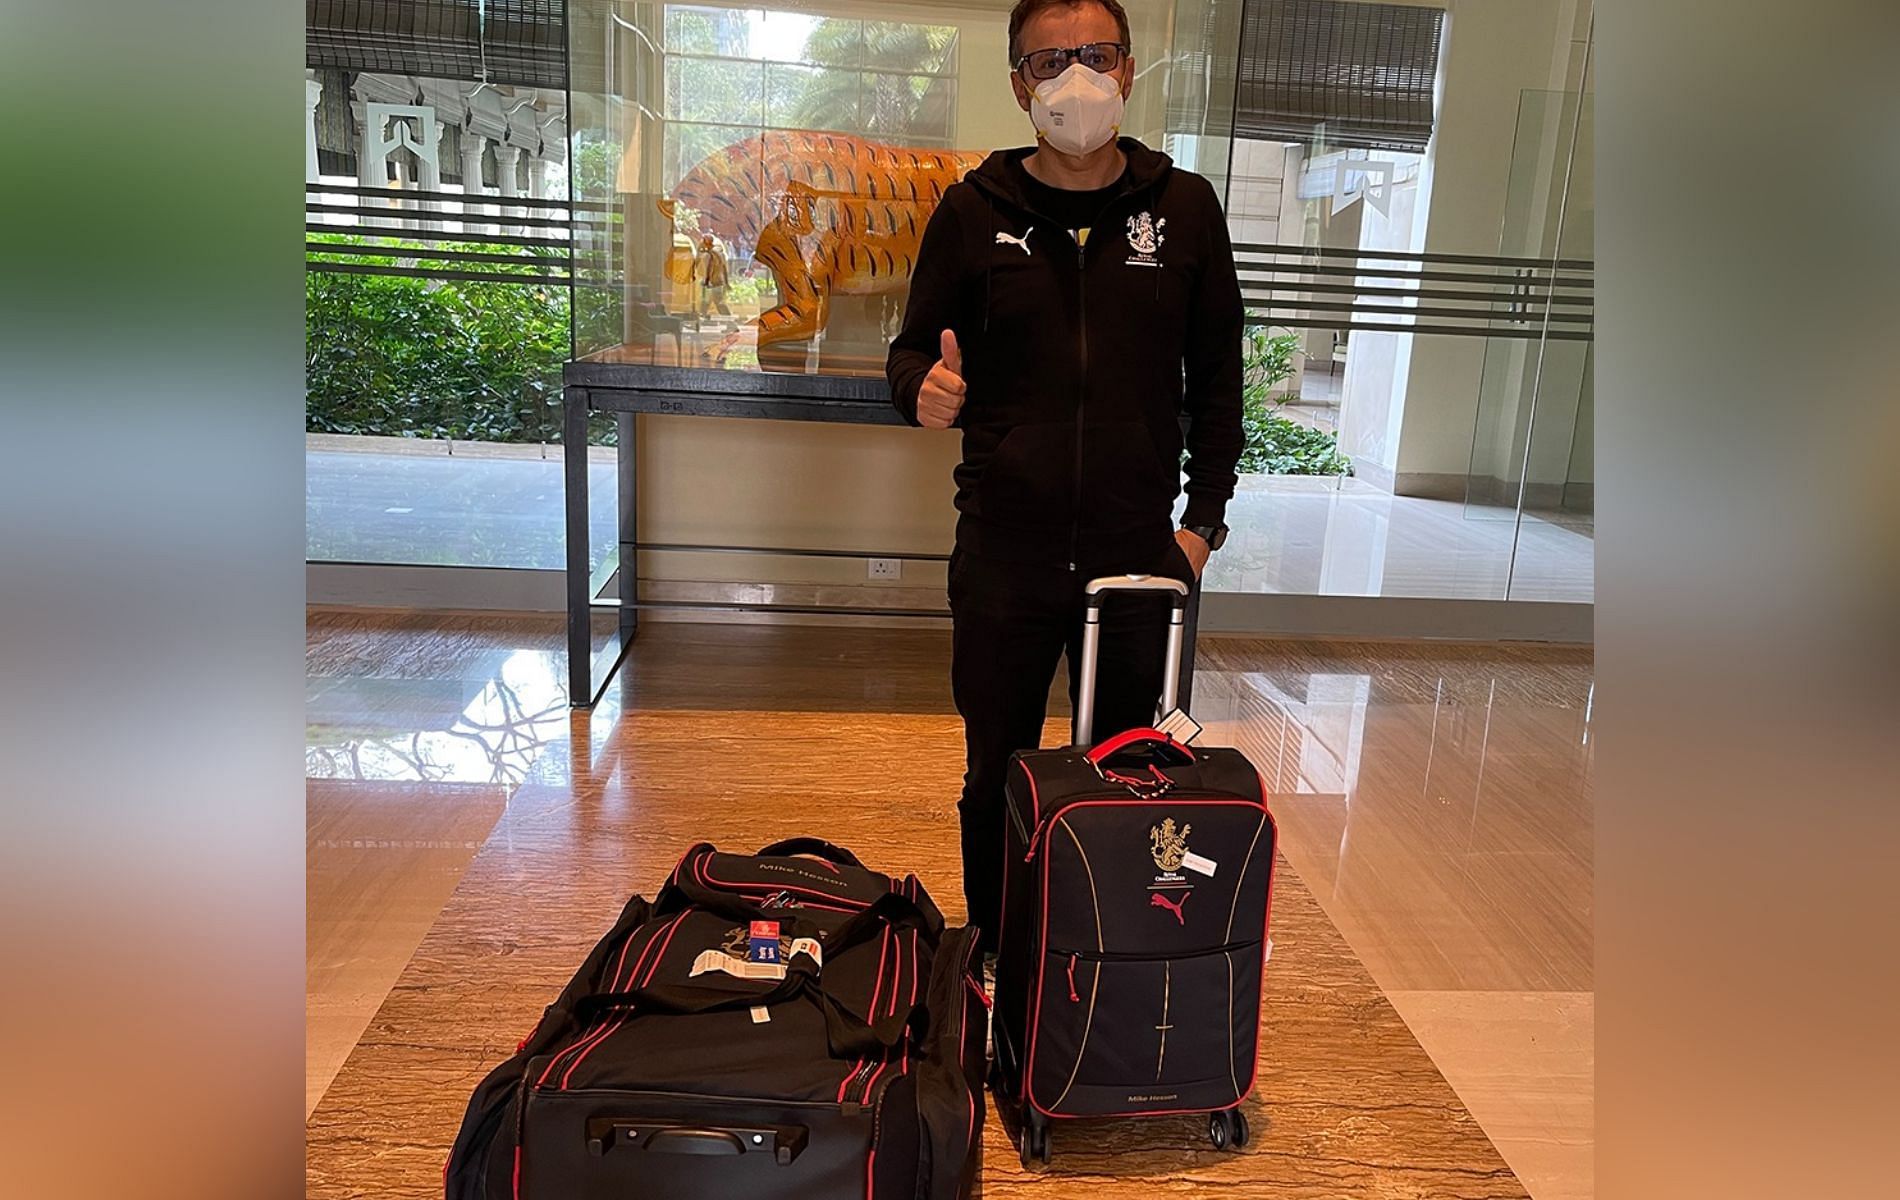 Mike Hesson arrived at Bengaluru today.